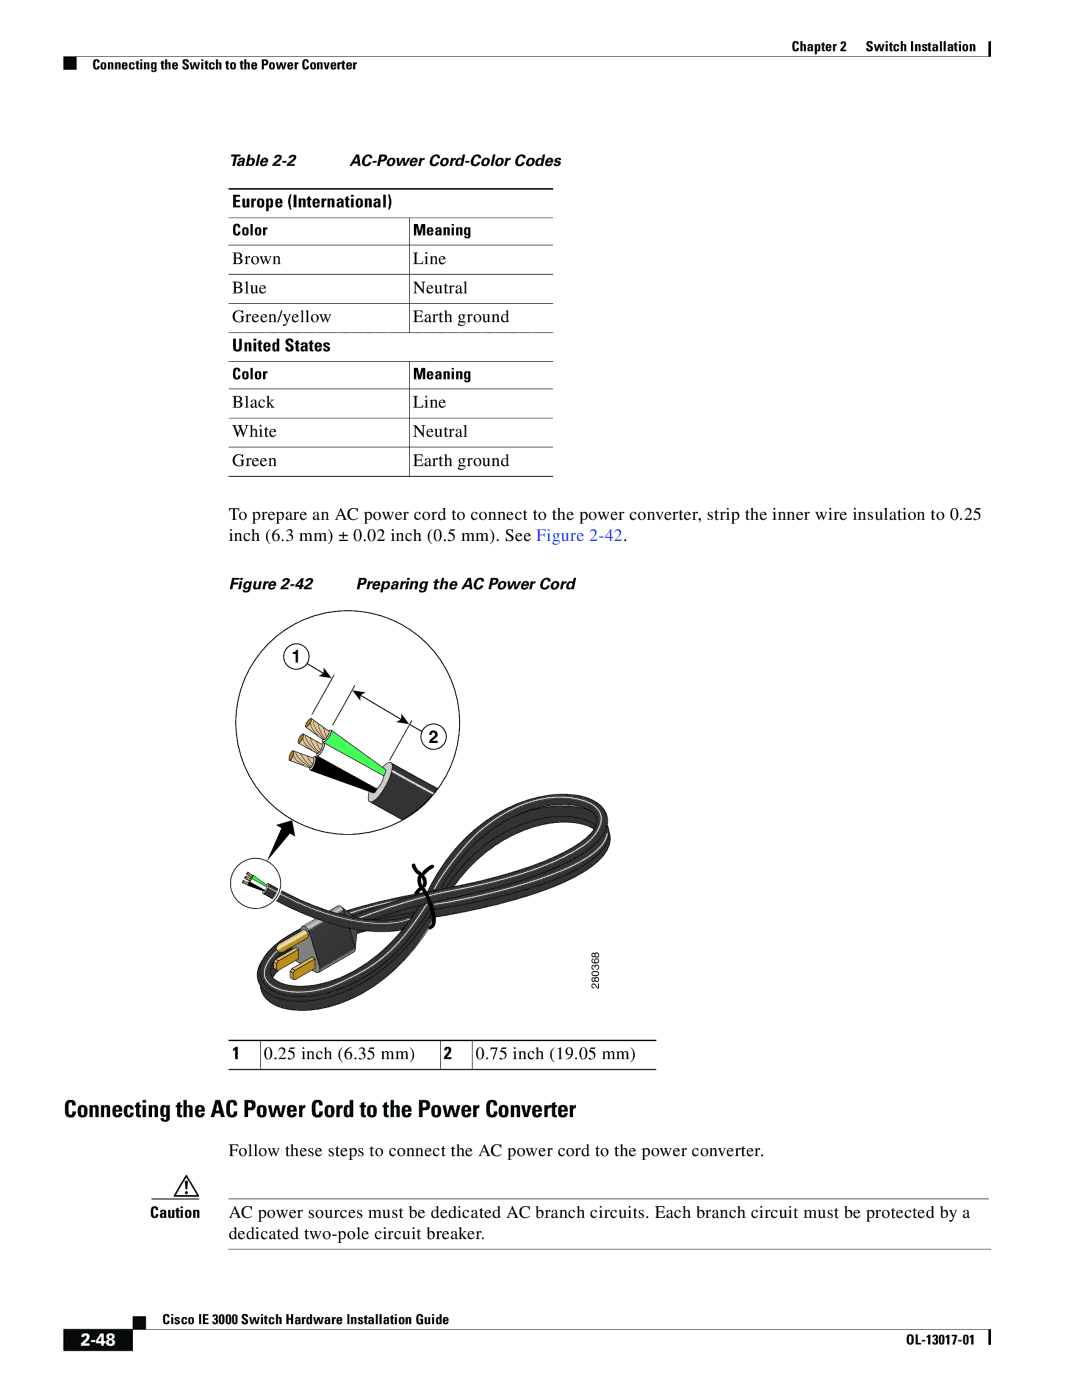 Cisco Systems IEM30004PC, IE 3000 Series manual Connecting the AC Power Cord to the Power Converter, United States 